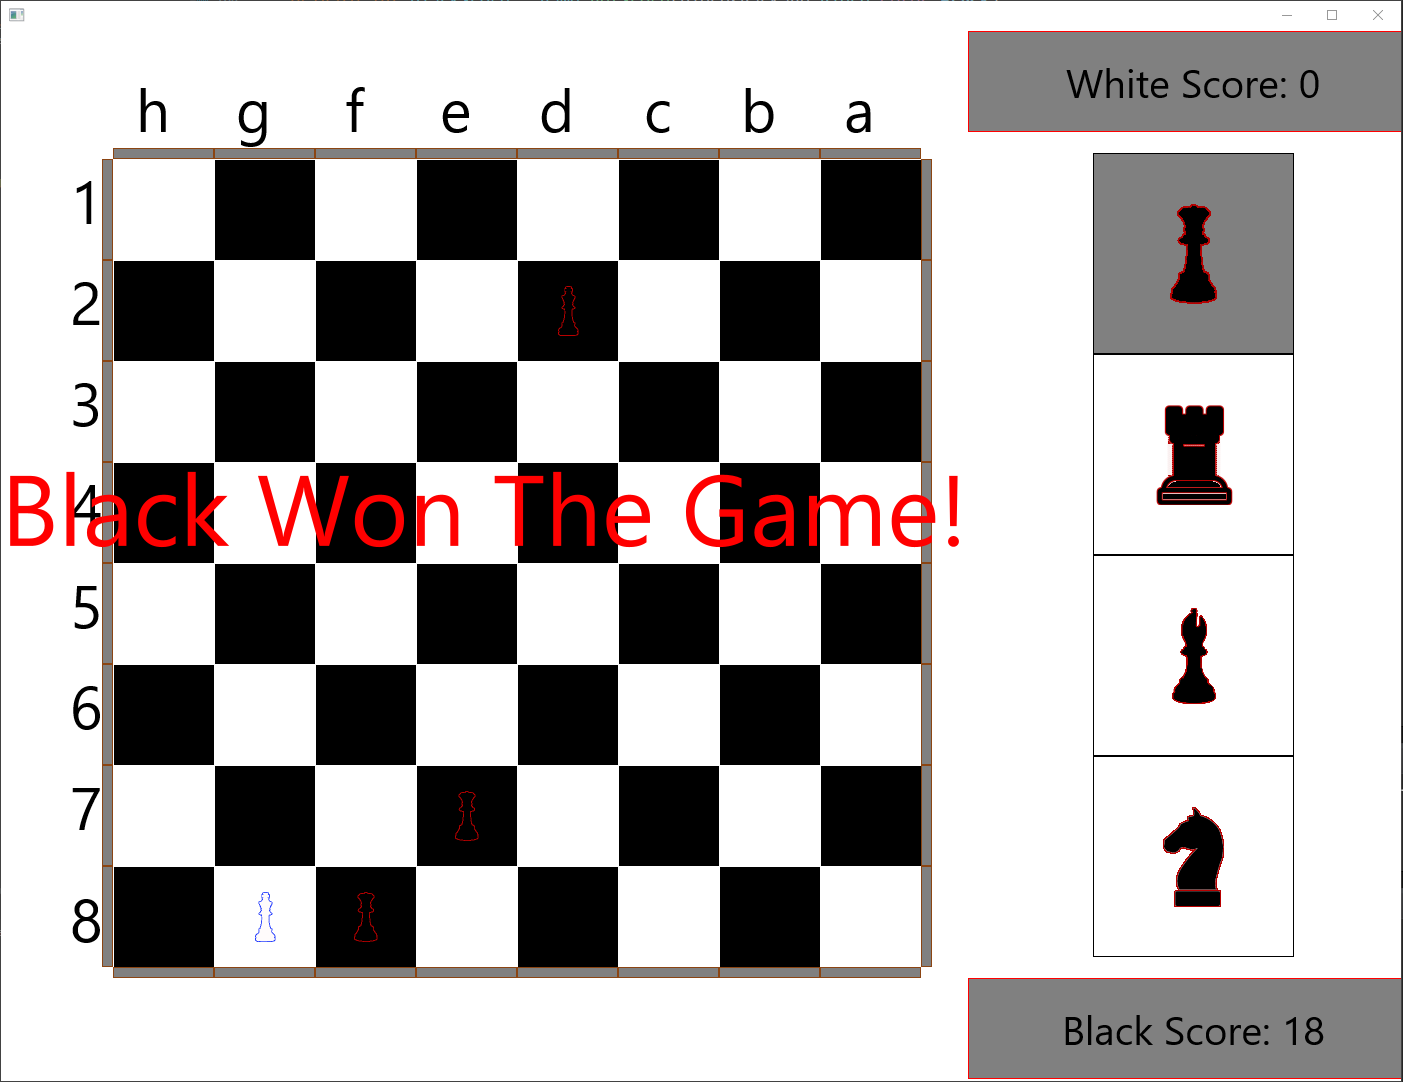 Red Text saying black won the game